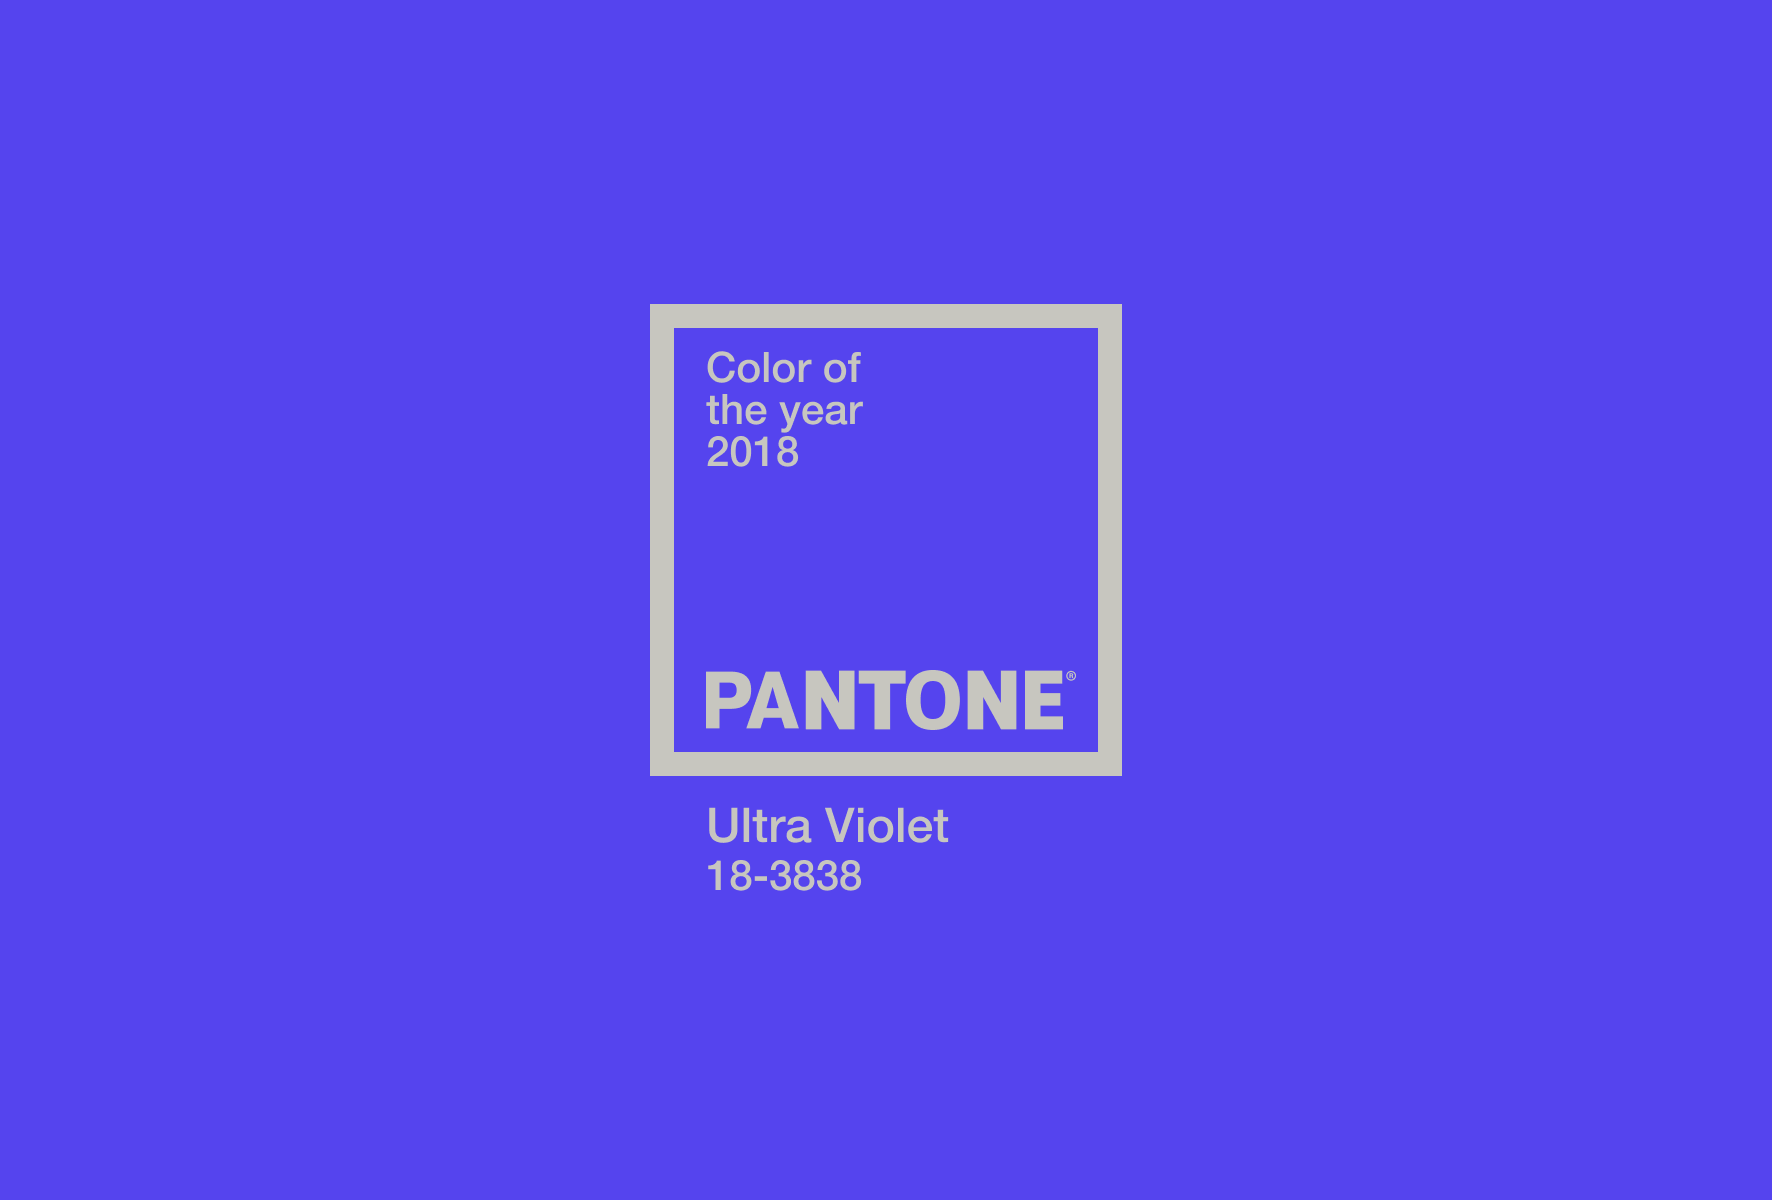 Pantone Colour of the Year 2018 - Ultra Violet